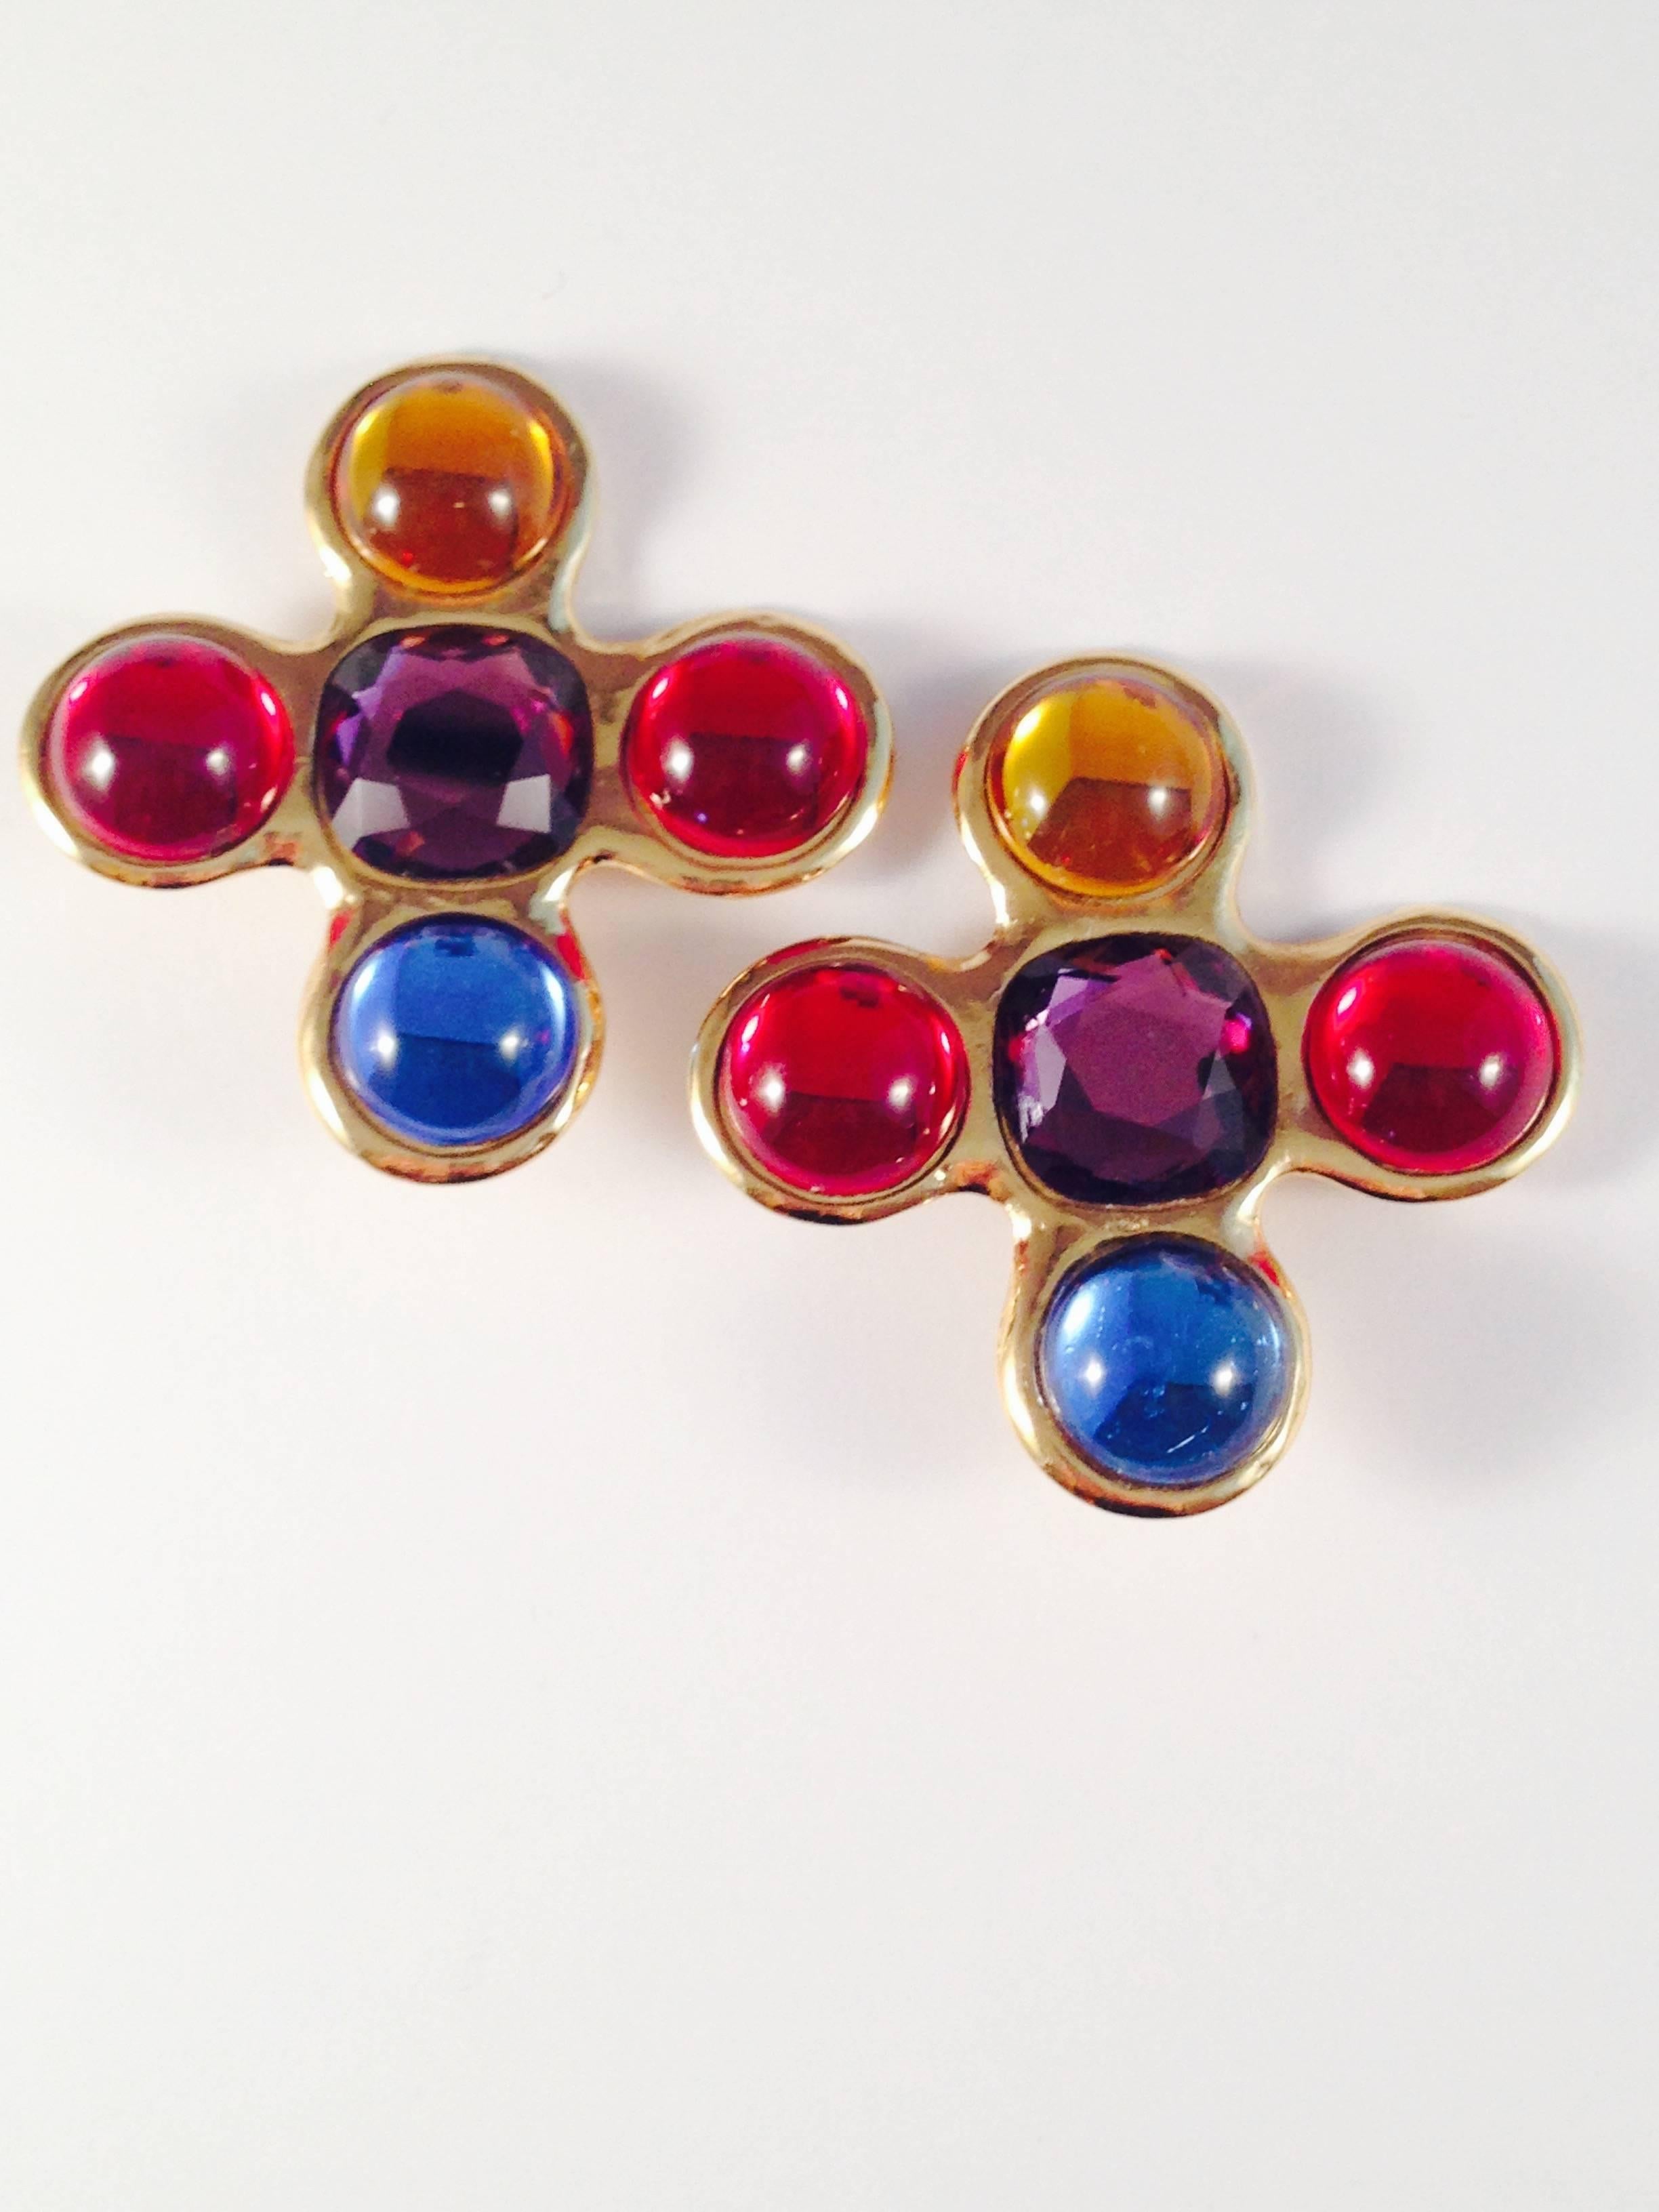 This is a fabulous pair of 1980s Yves Saint Laurent maltese cross clip-on earrings. They are gold tone with multi-colored glass and cabochon stones. They measure 2